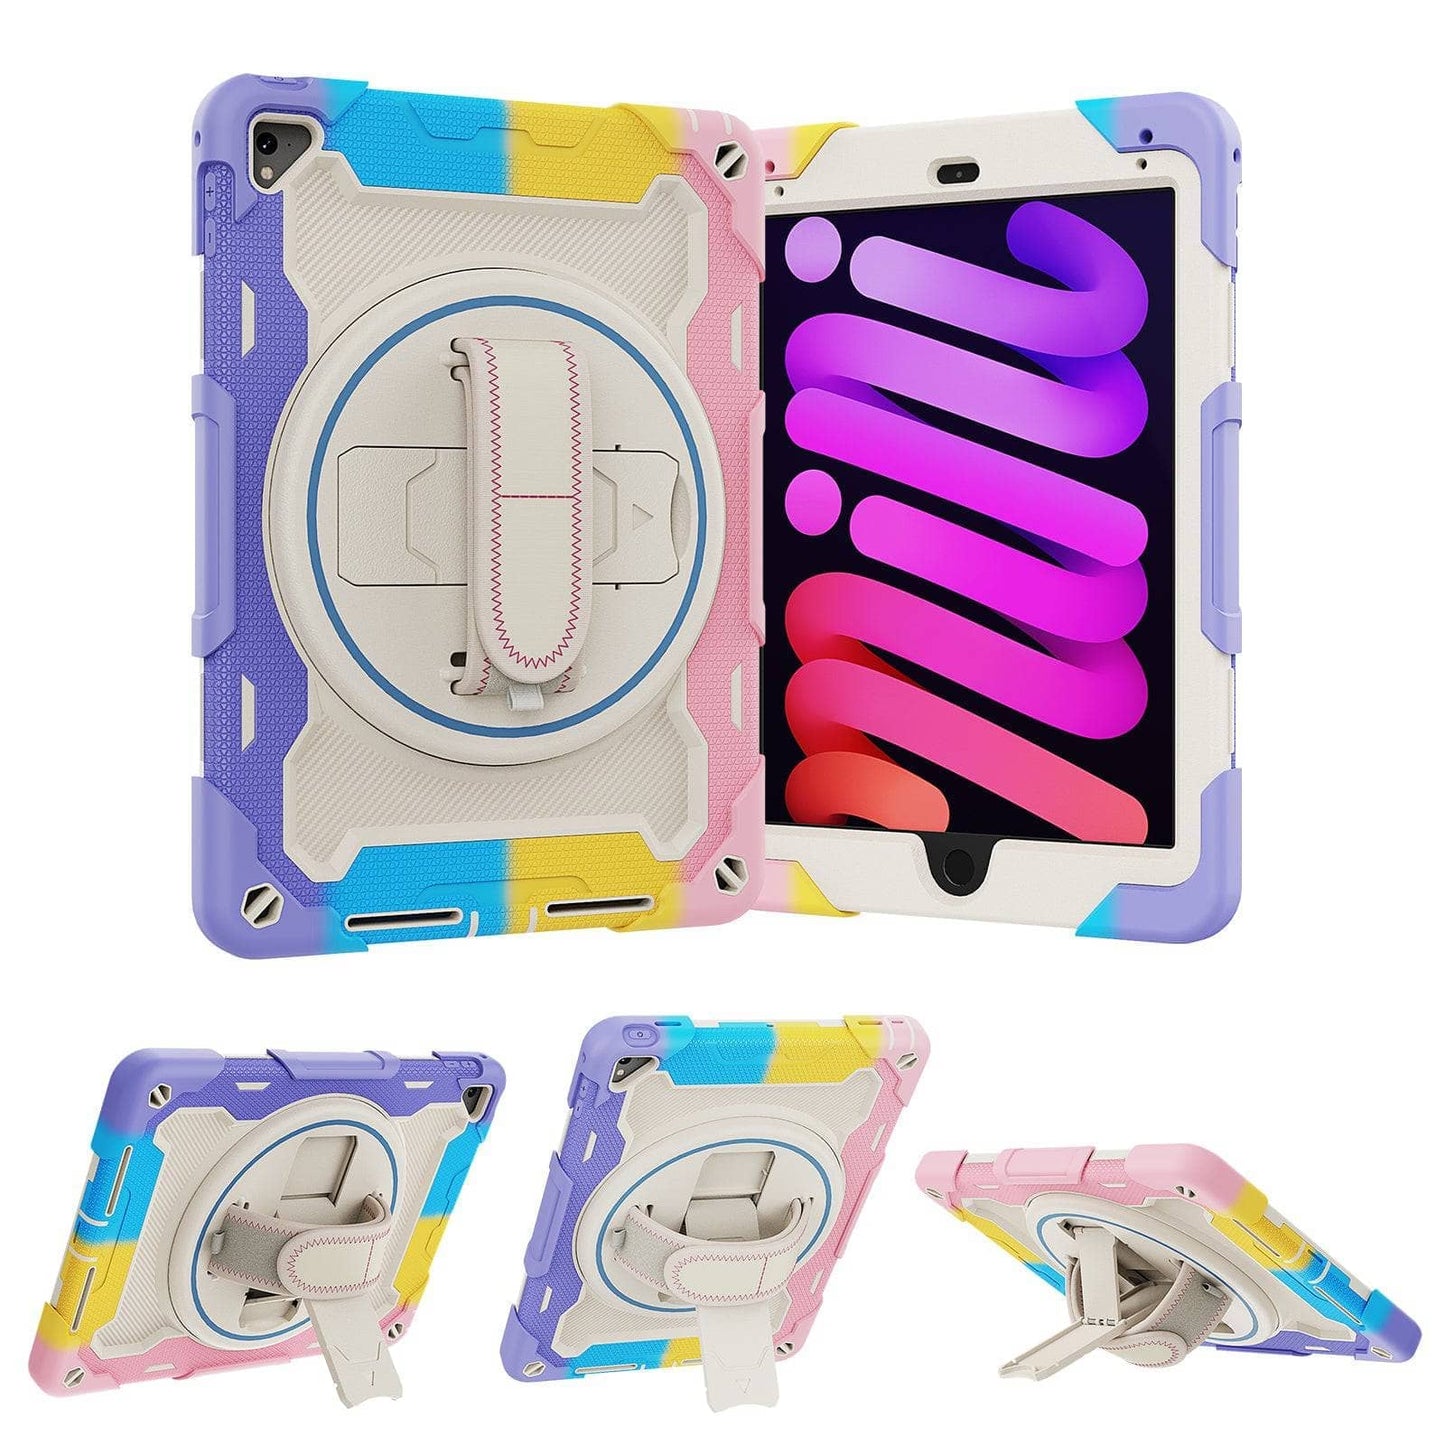 Case For iPad 9.7 2017 2018 Heavy Duty Shockproof Kids Cover For iPad Pro 9.7 inch 5th Generation Tablet Case Shoulder Strap-iPad Case-MASCOTS-www.PhoneGuy.com.au